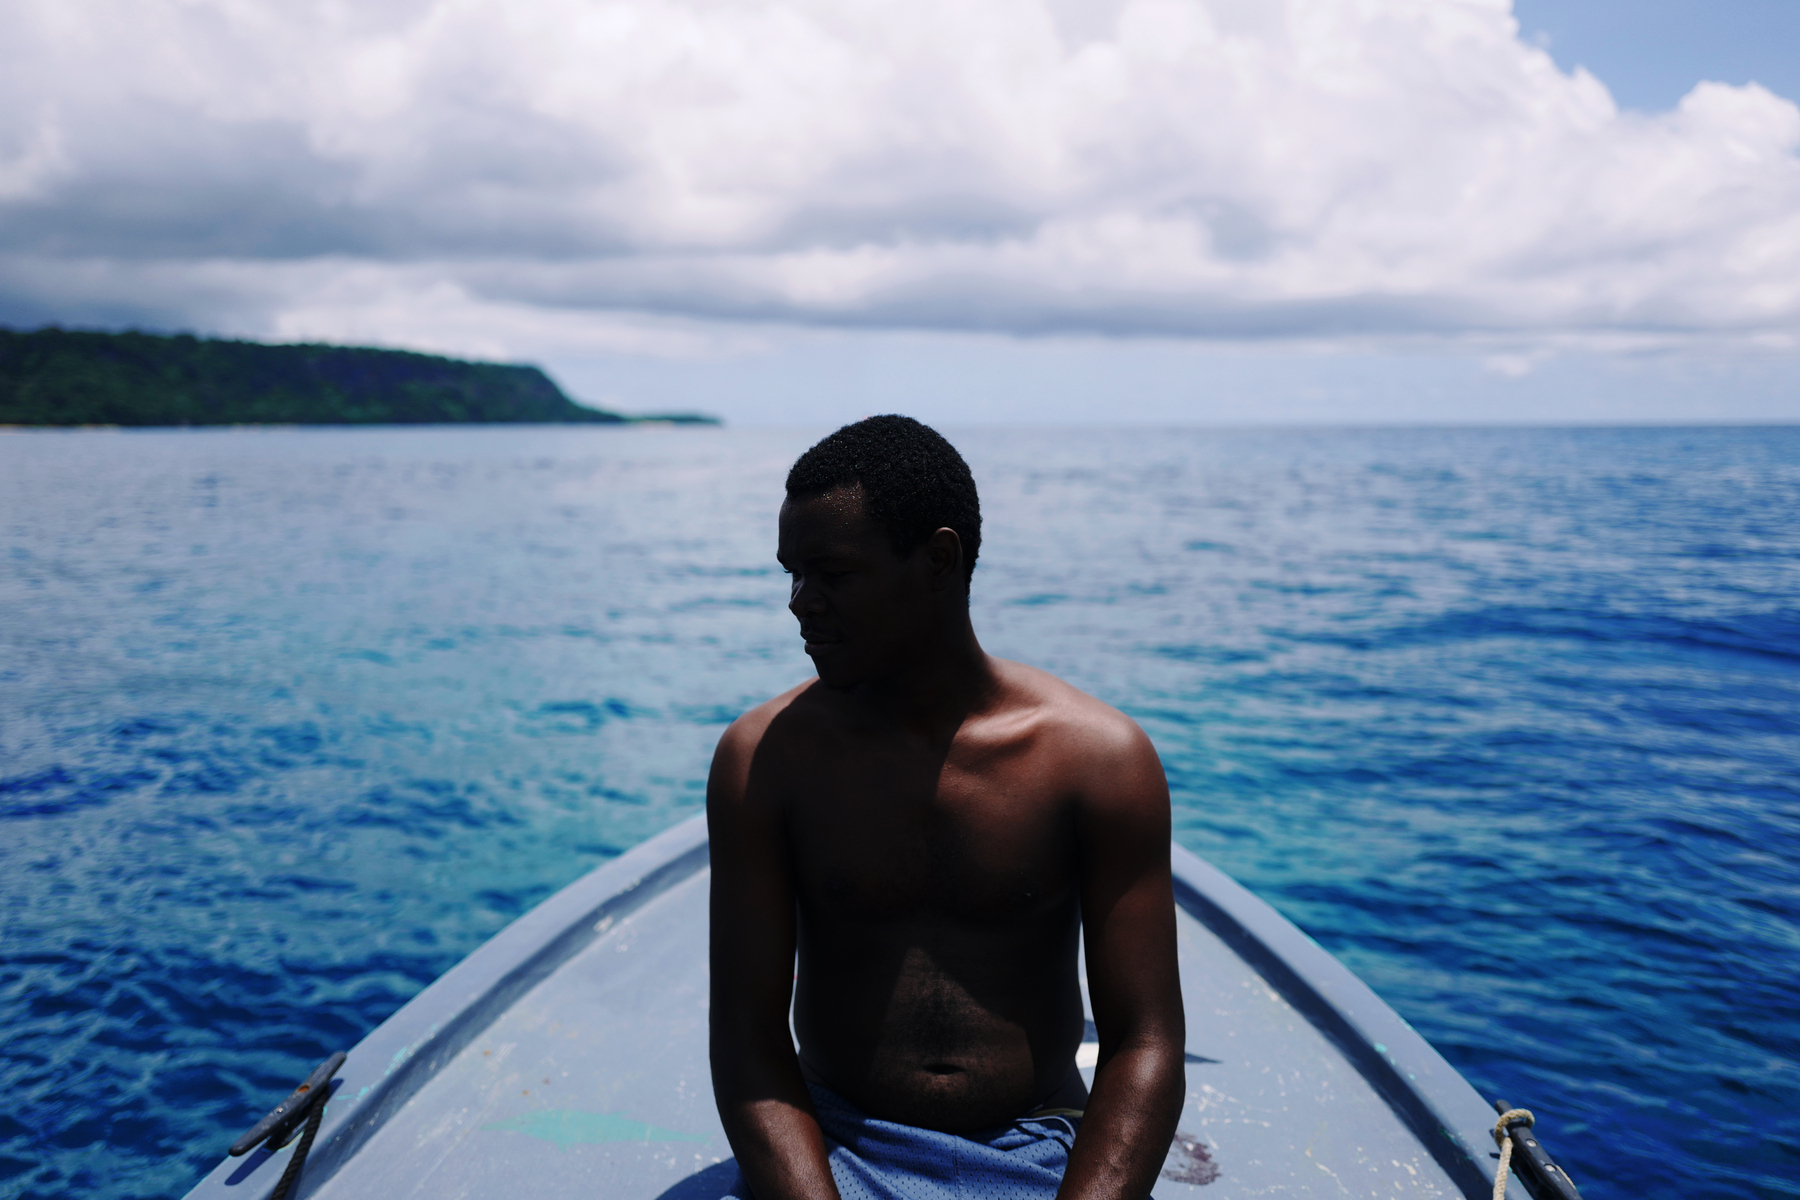 a man sits on a boat, pensive, with blue water and sky all around him.